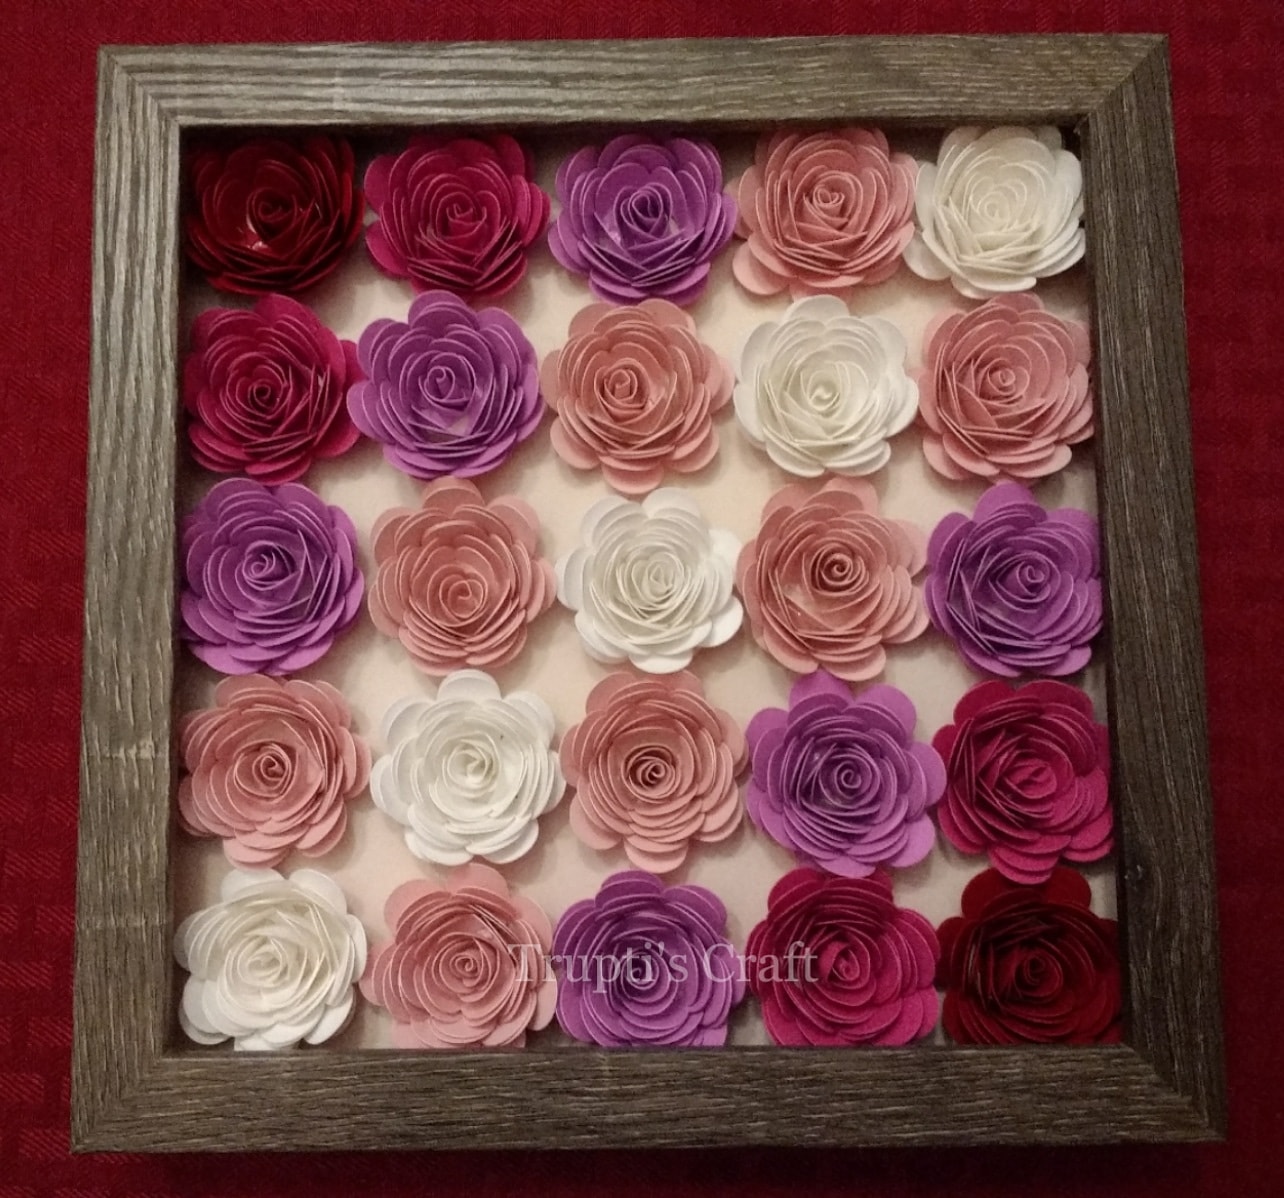 Trupti S Craft Paper Flower Frame Wall Hanging Wall Decor Gift